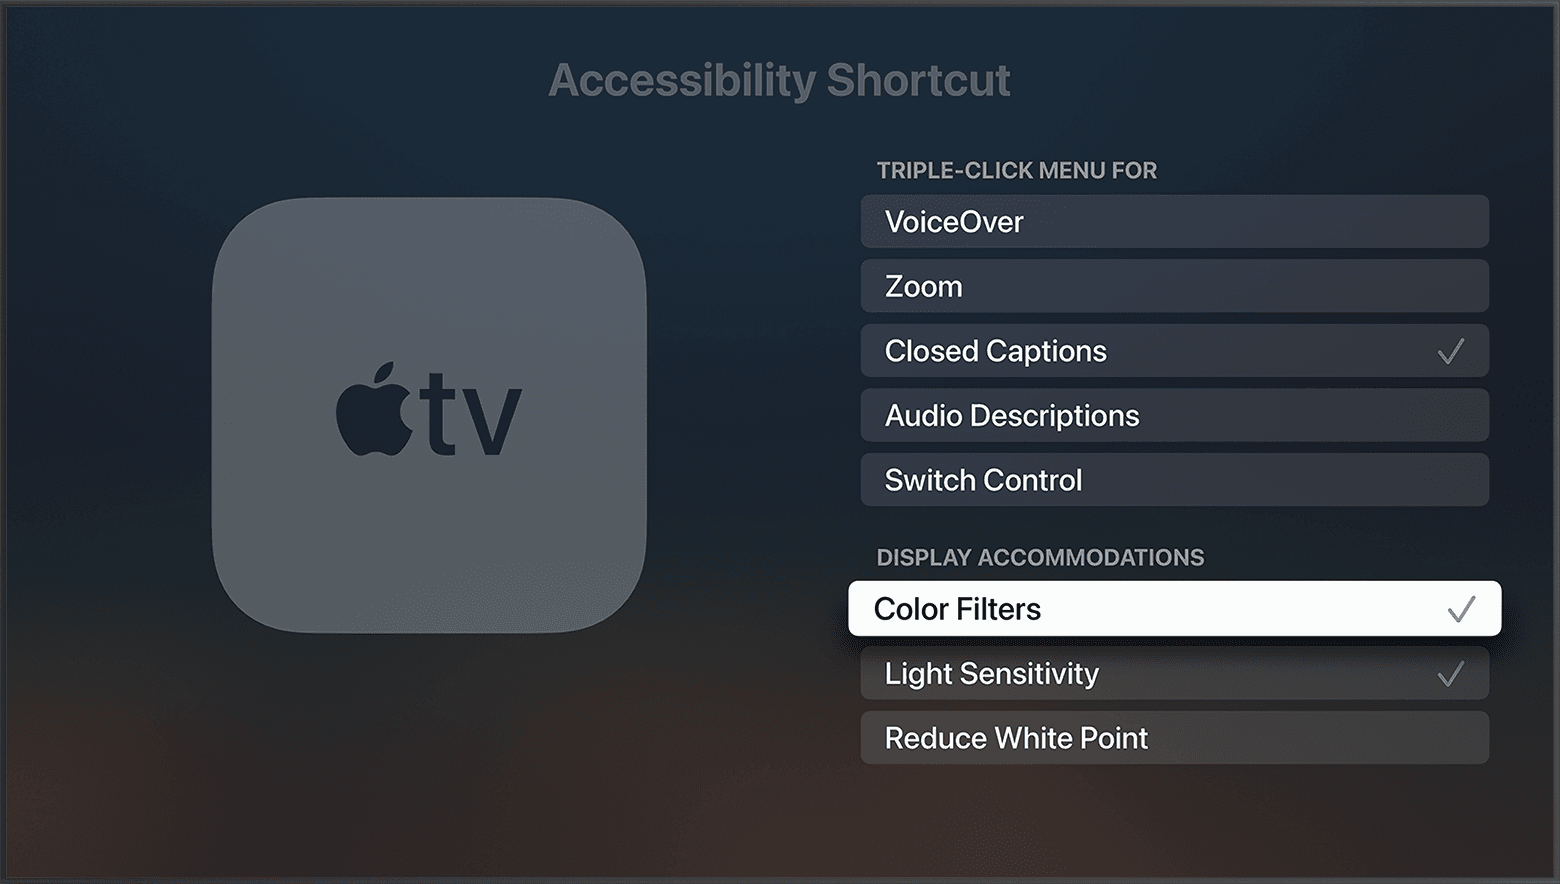 Vandret bungee jump Encommium Use Display Accommodations on your Apple TV - Apple Support